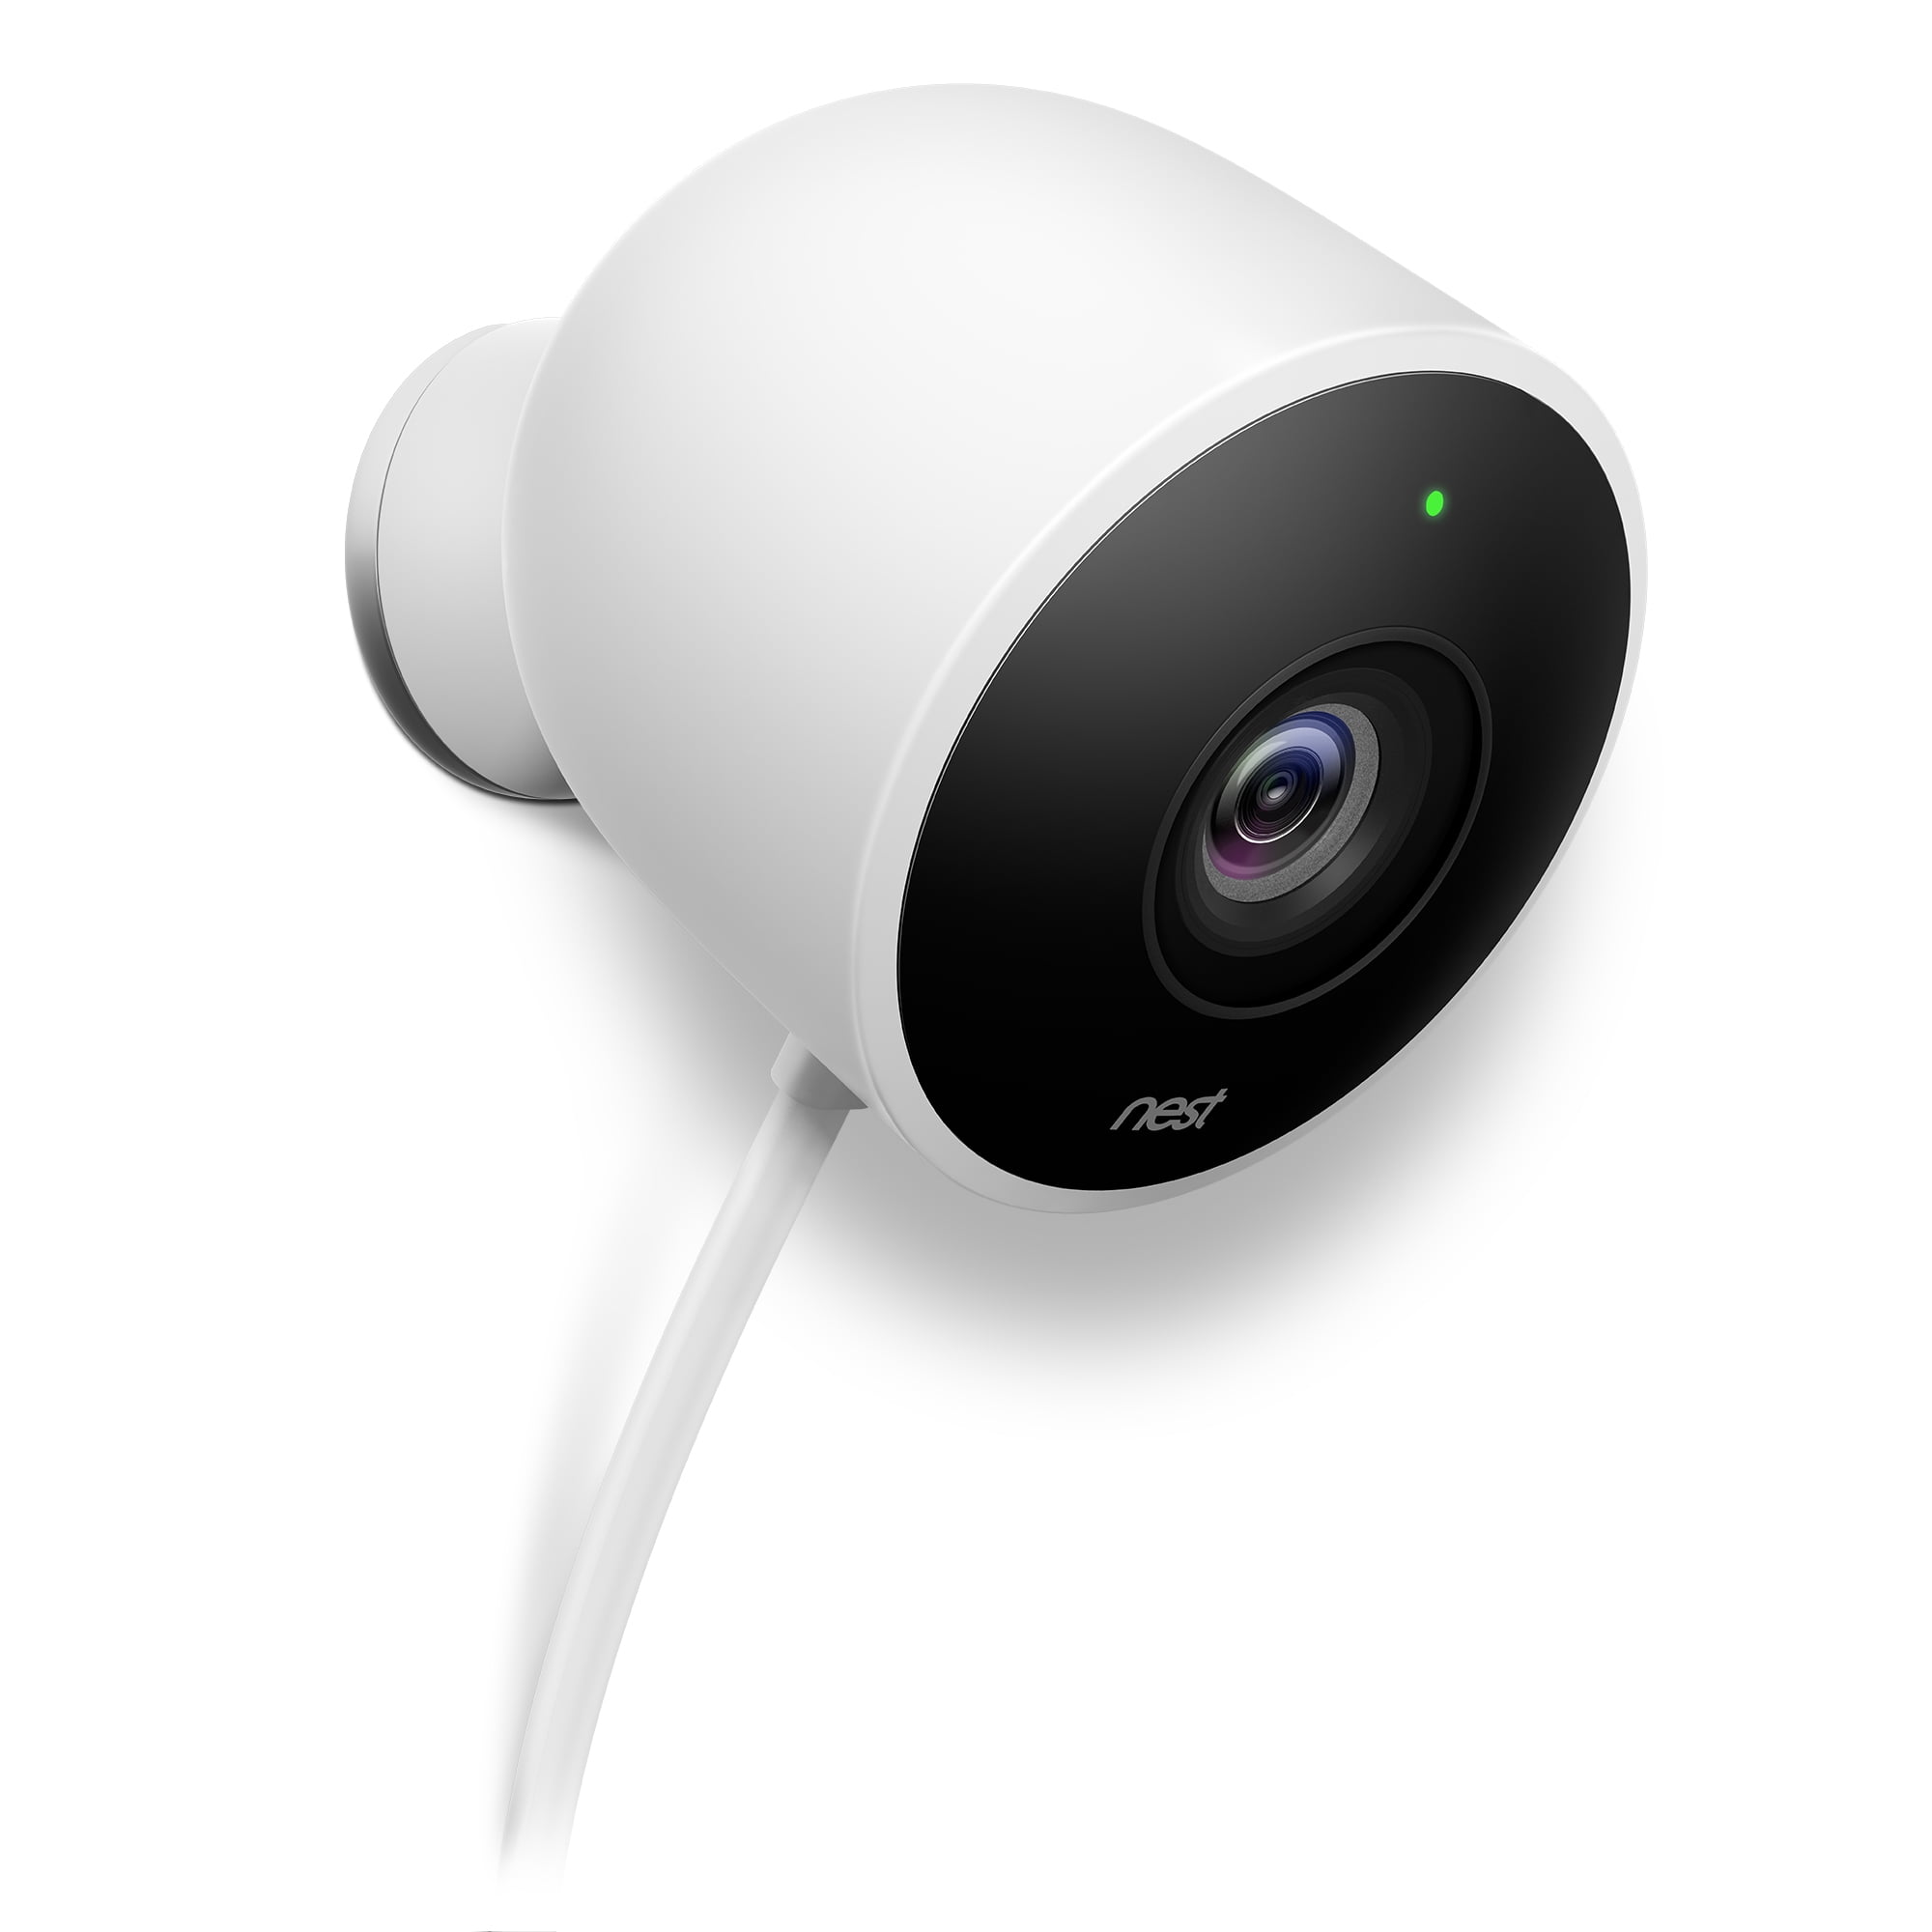 Can Nest outdoor camera be hardwired?